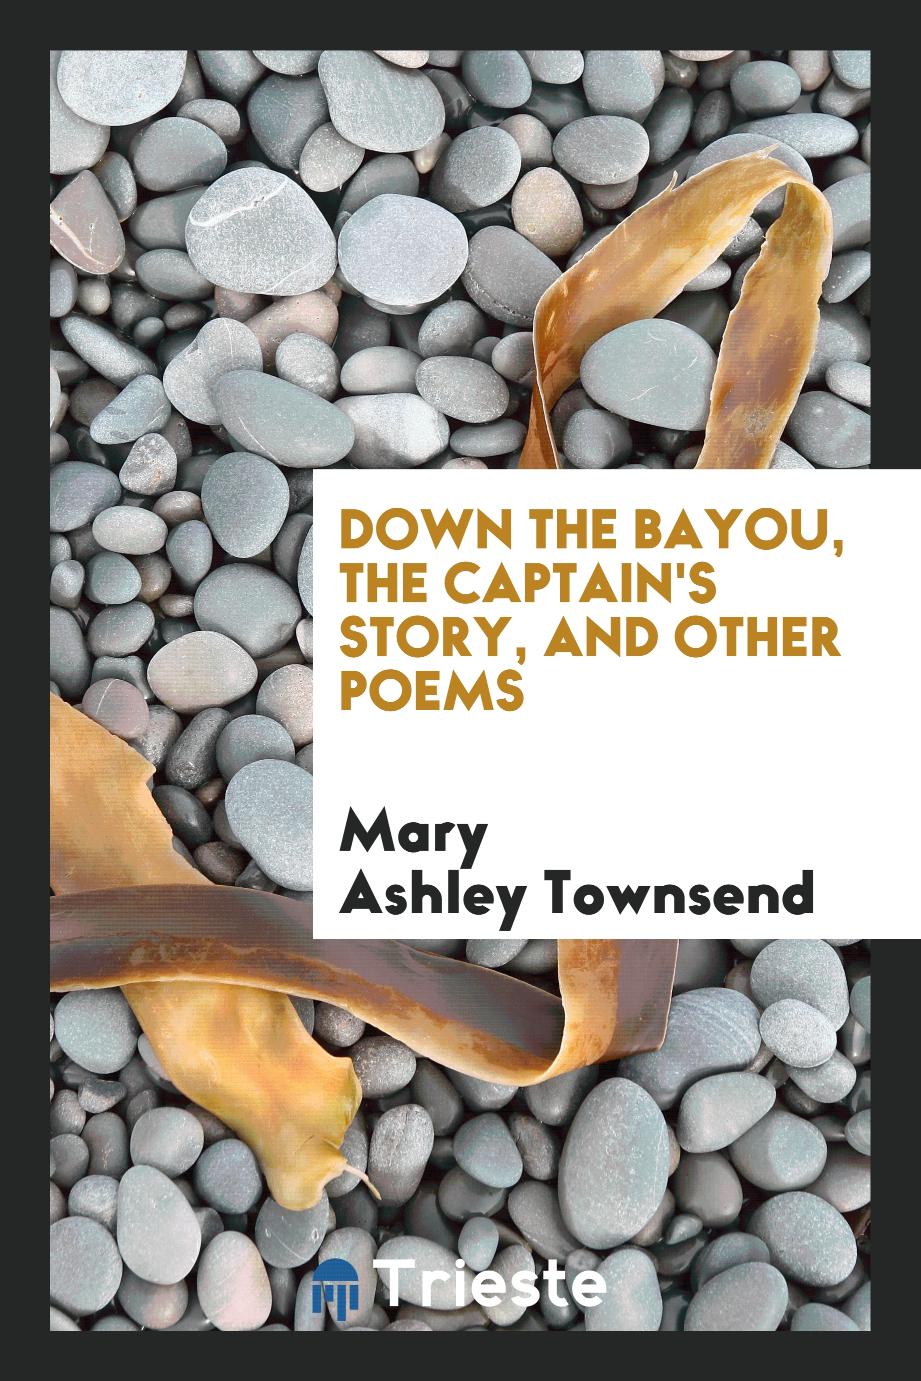 Down the bayou, The captain's story, and other poems